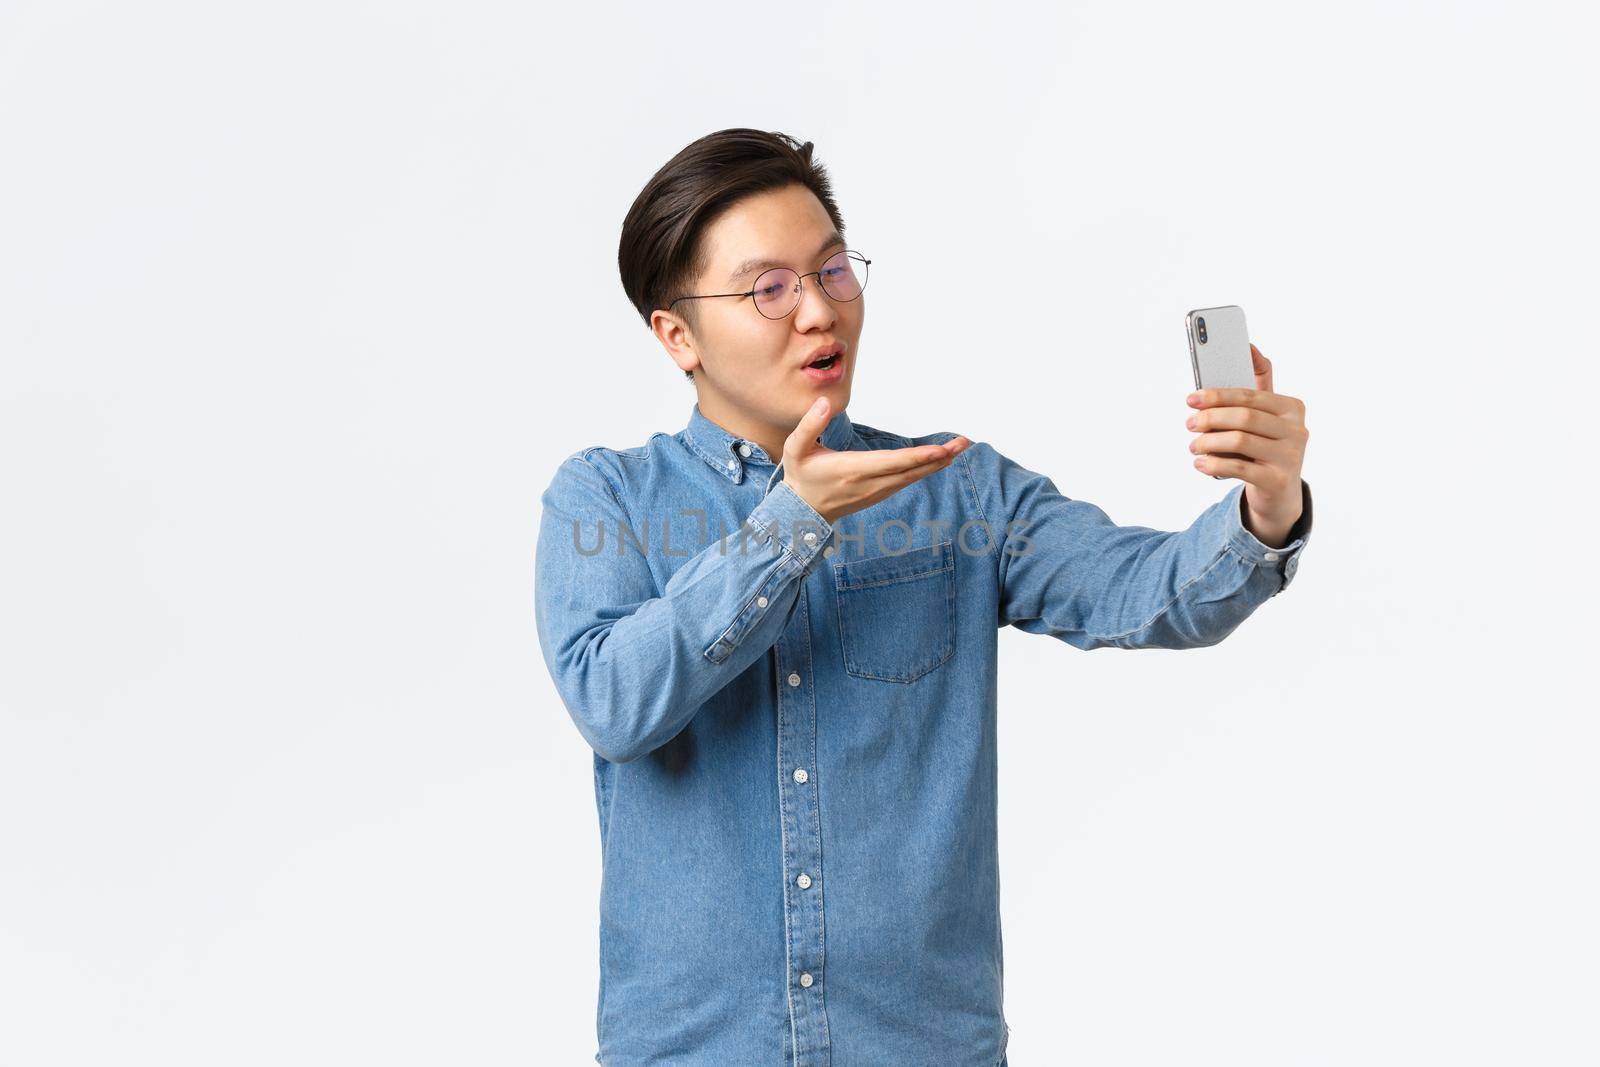 Silly and cute asian guy smiling, talking with girlfriend using smartphone, video calling or taking selfie, sending air kiss at mobile phone camera, standing white background romantic.